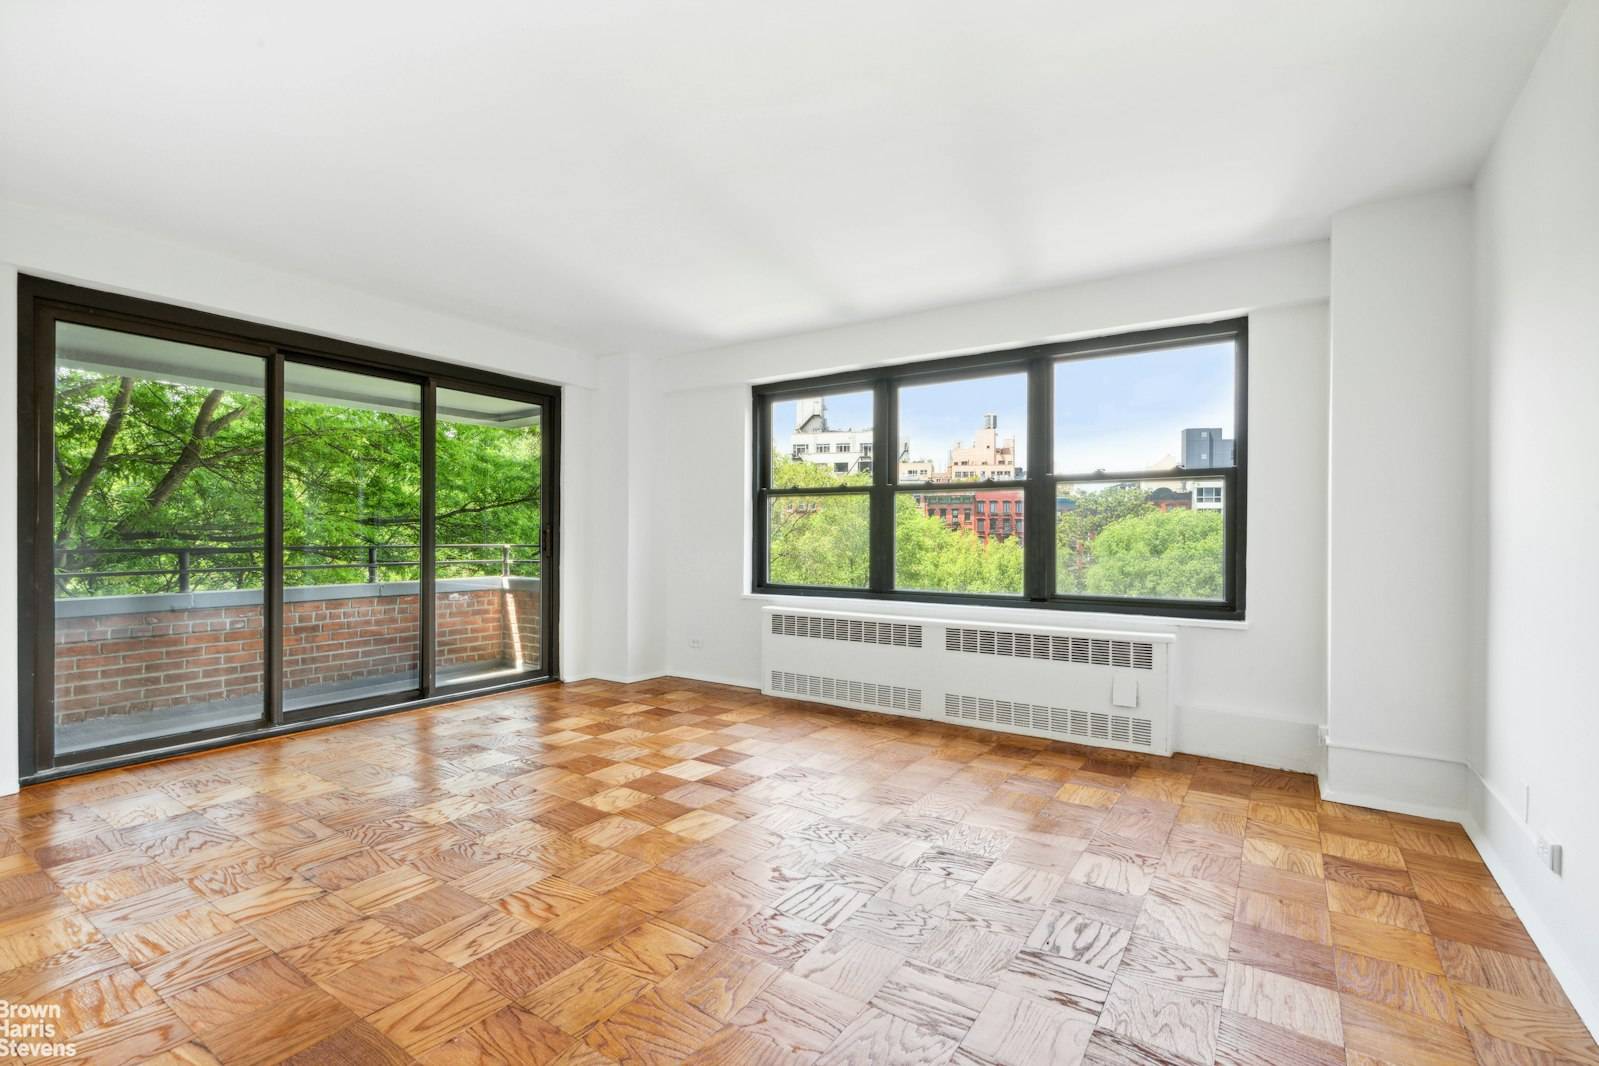 Spacious 2BR Balcony ! Fantastic layout with a wall of west facing windows with treetop views along with sliding glass doors leading to your own private balcony.